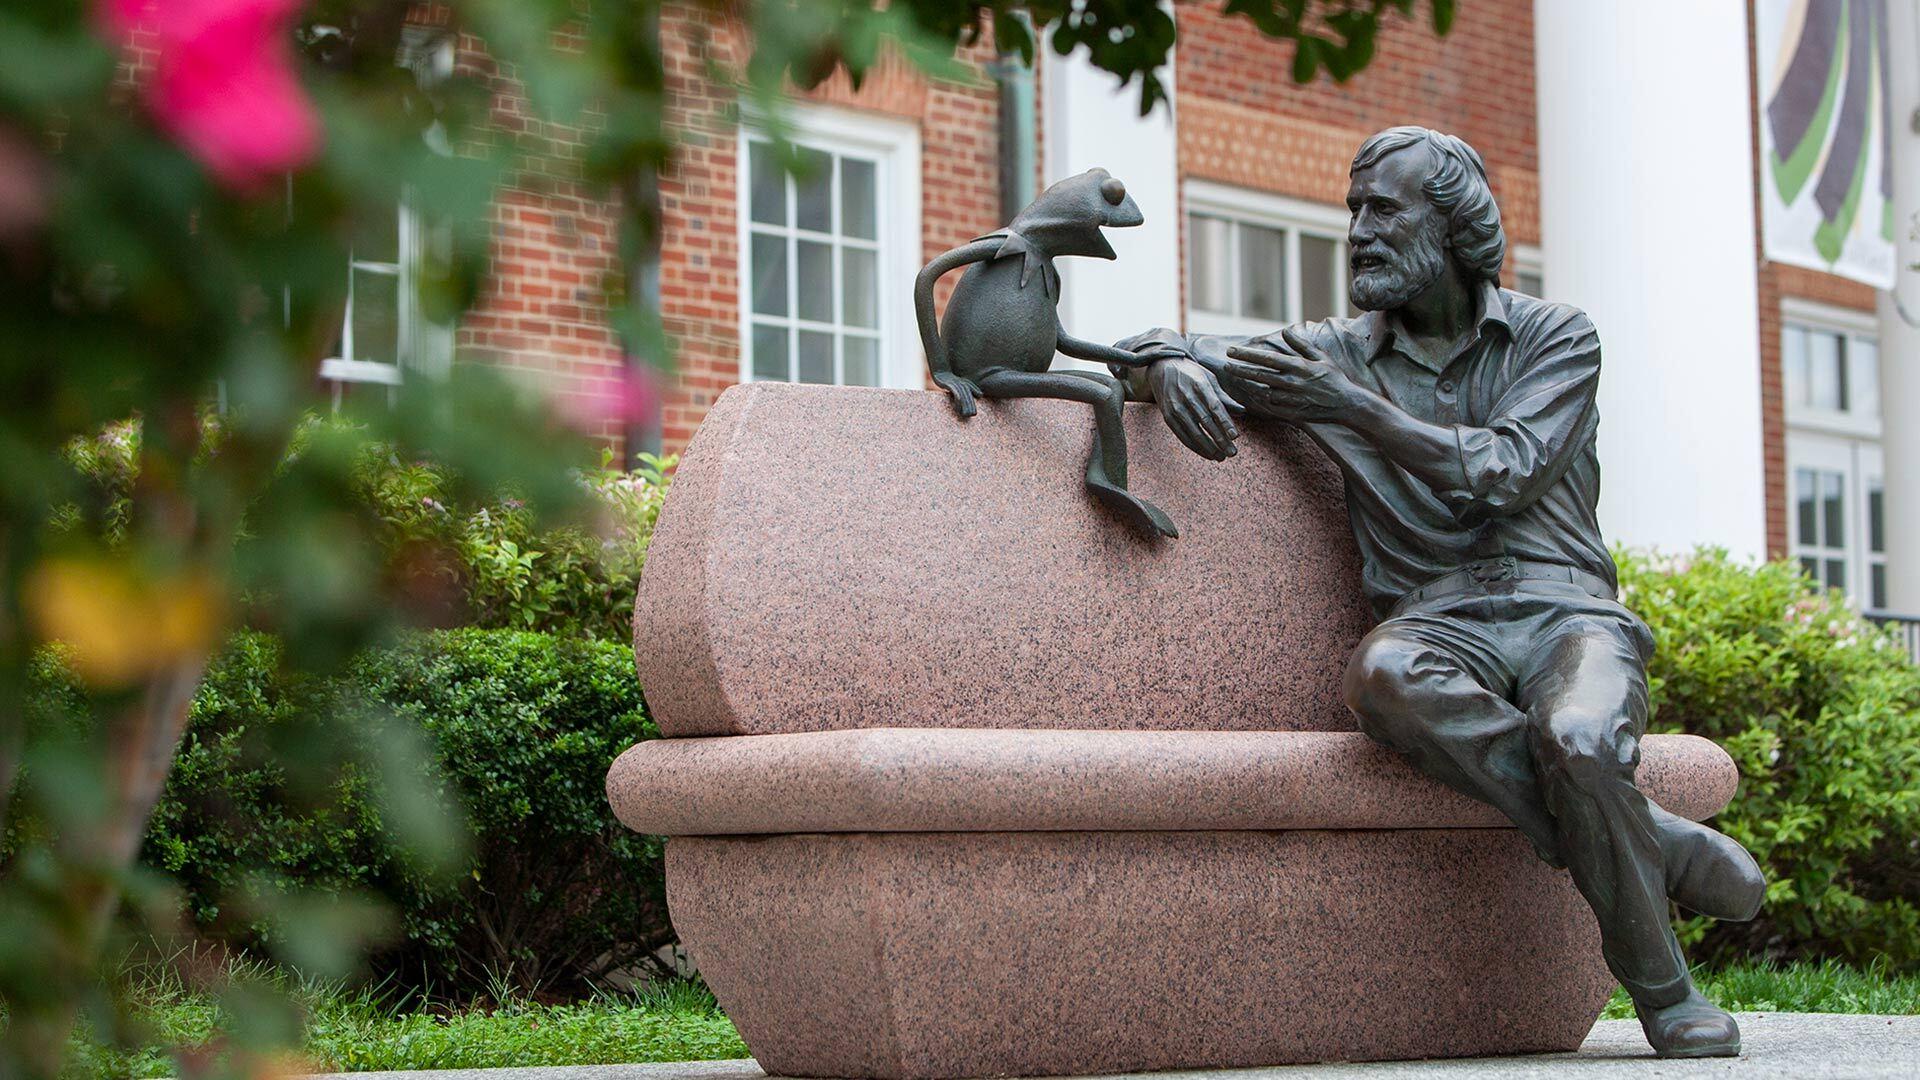 Jim Henson and Kermit the Frog Statue Outside the Stamp Student Union